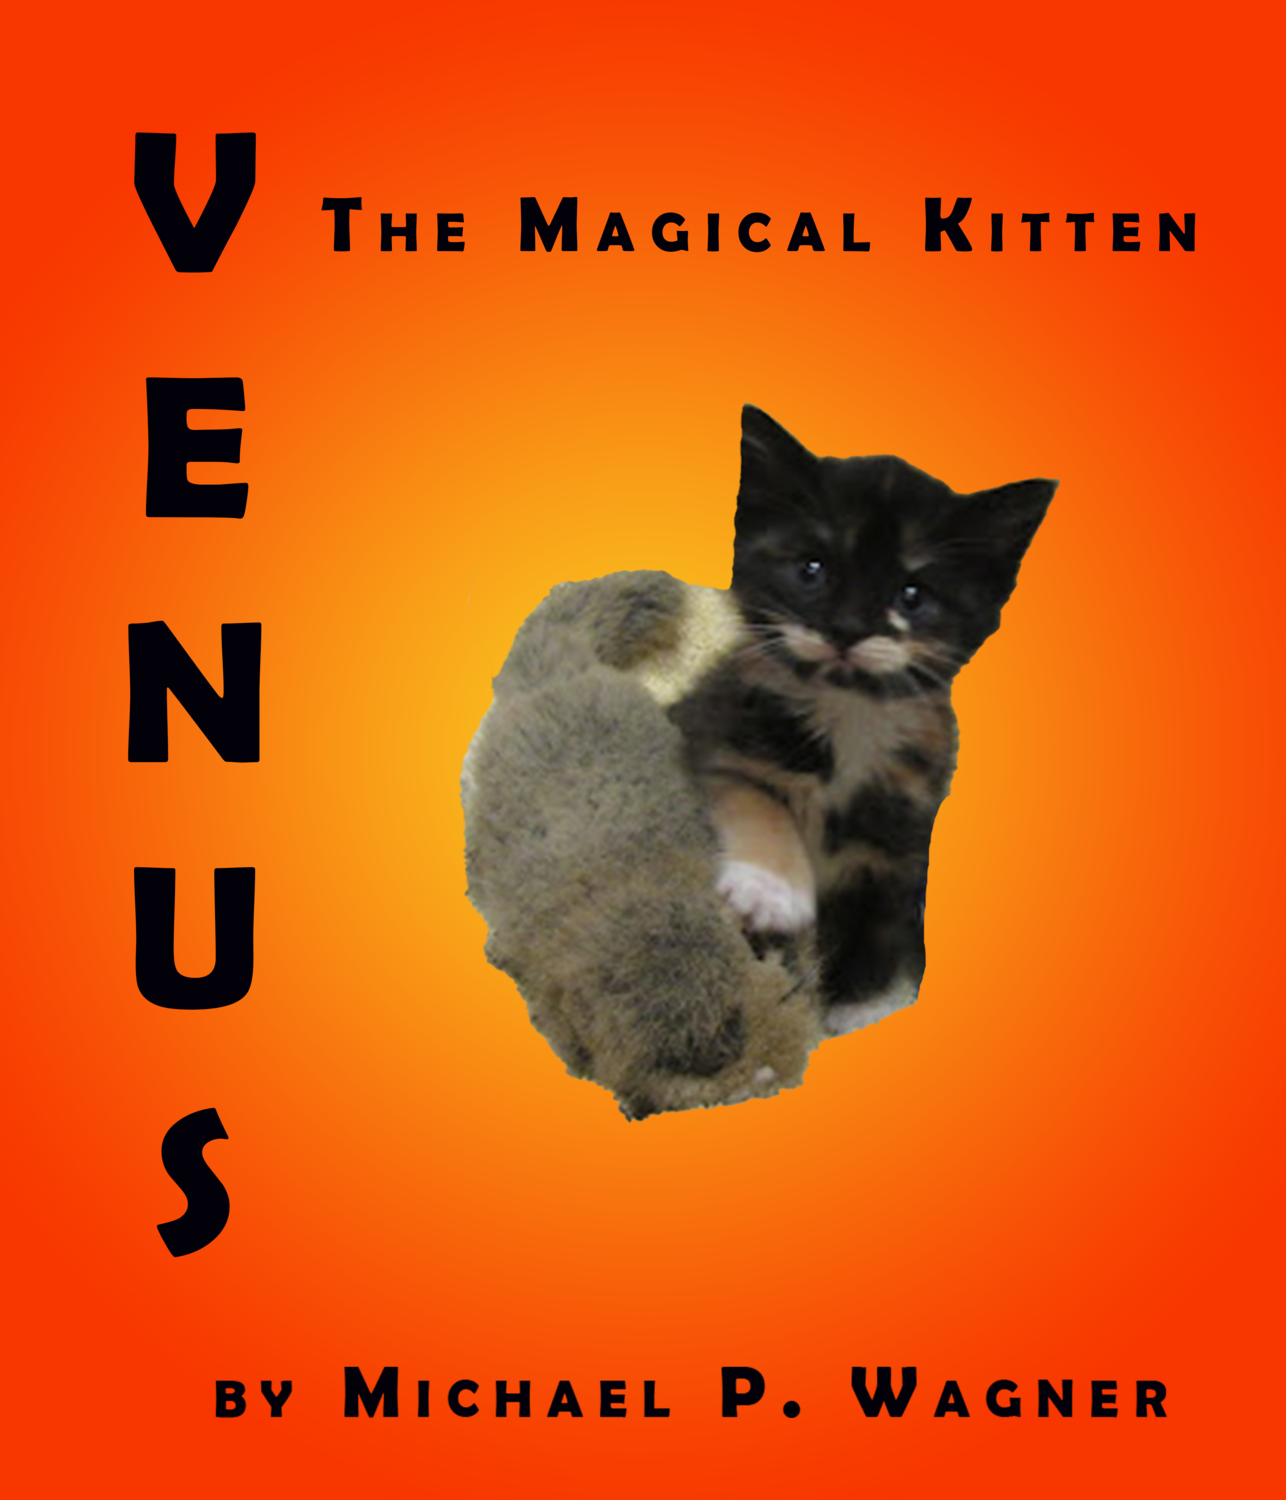 Venus: The Magical Kitten (PRINT and PDF EBOOK) (AUTOGRAPHED)